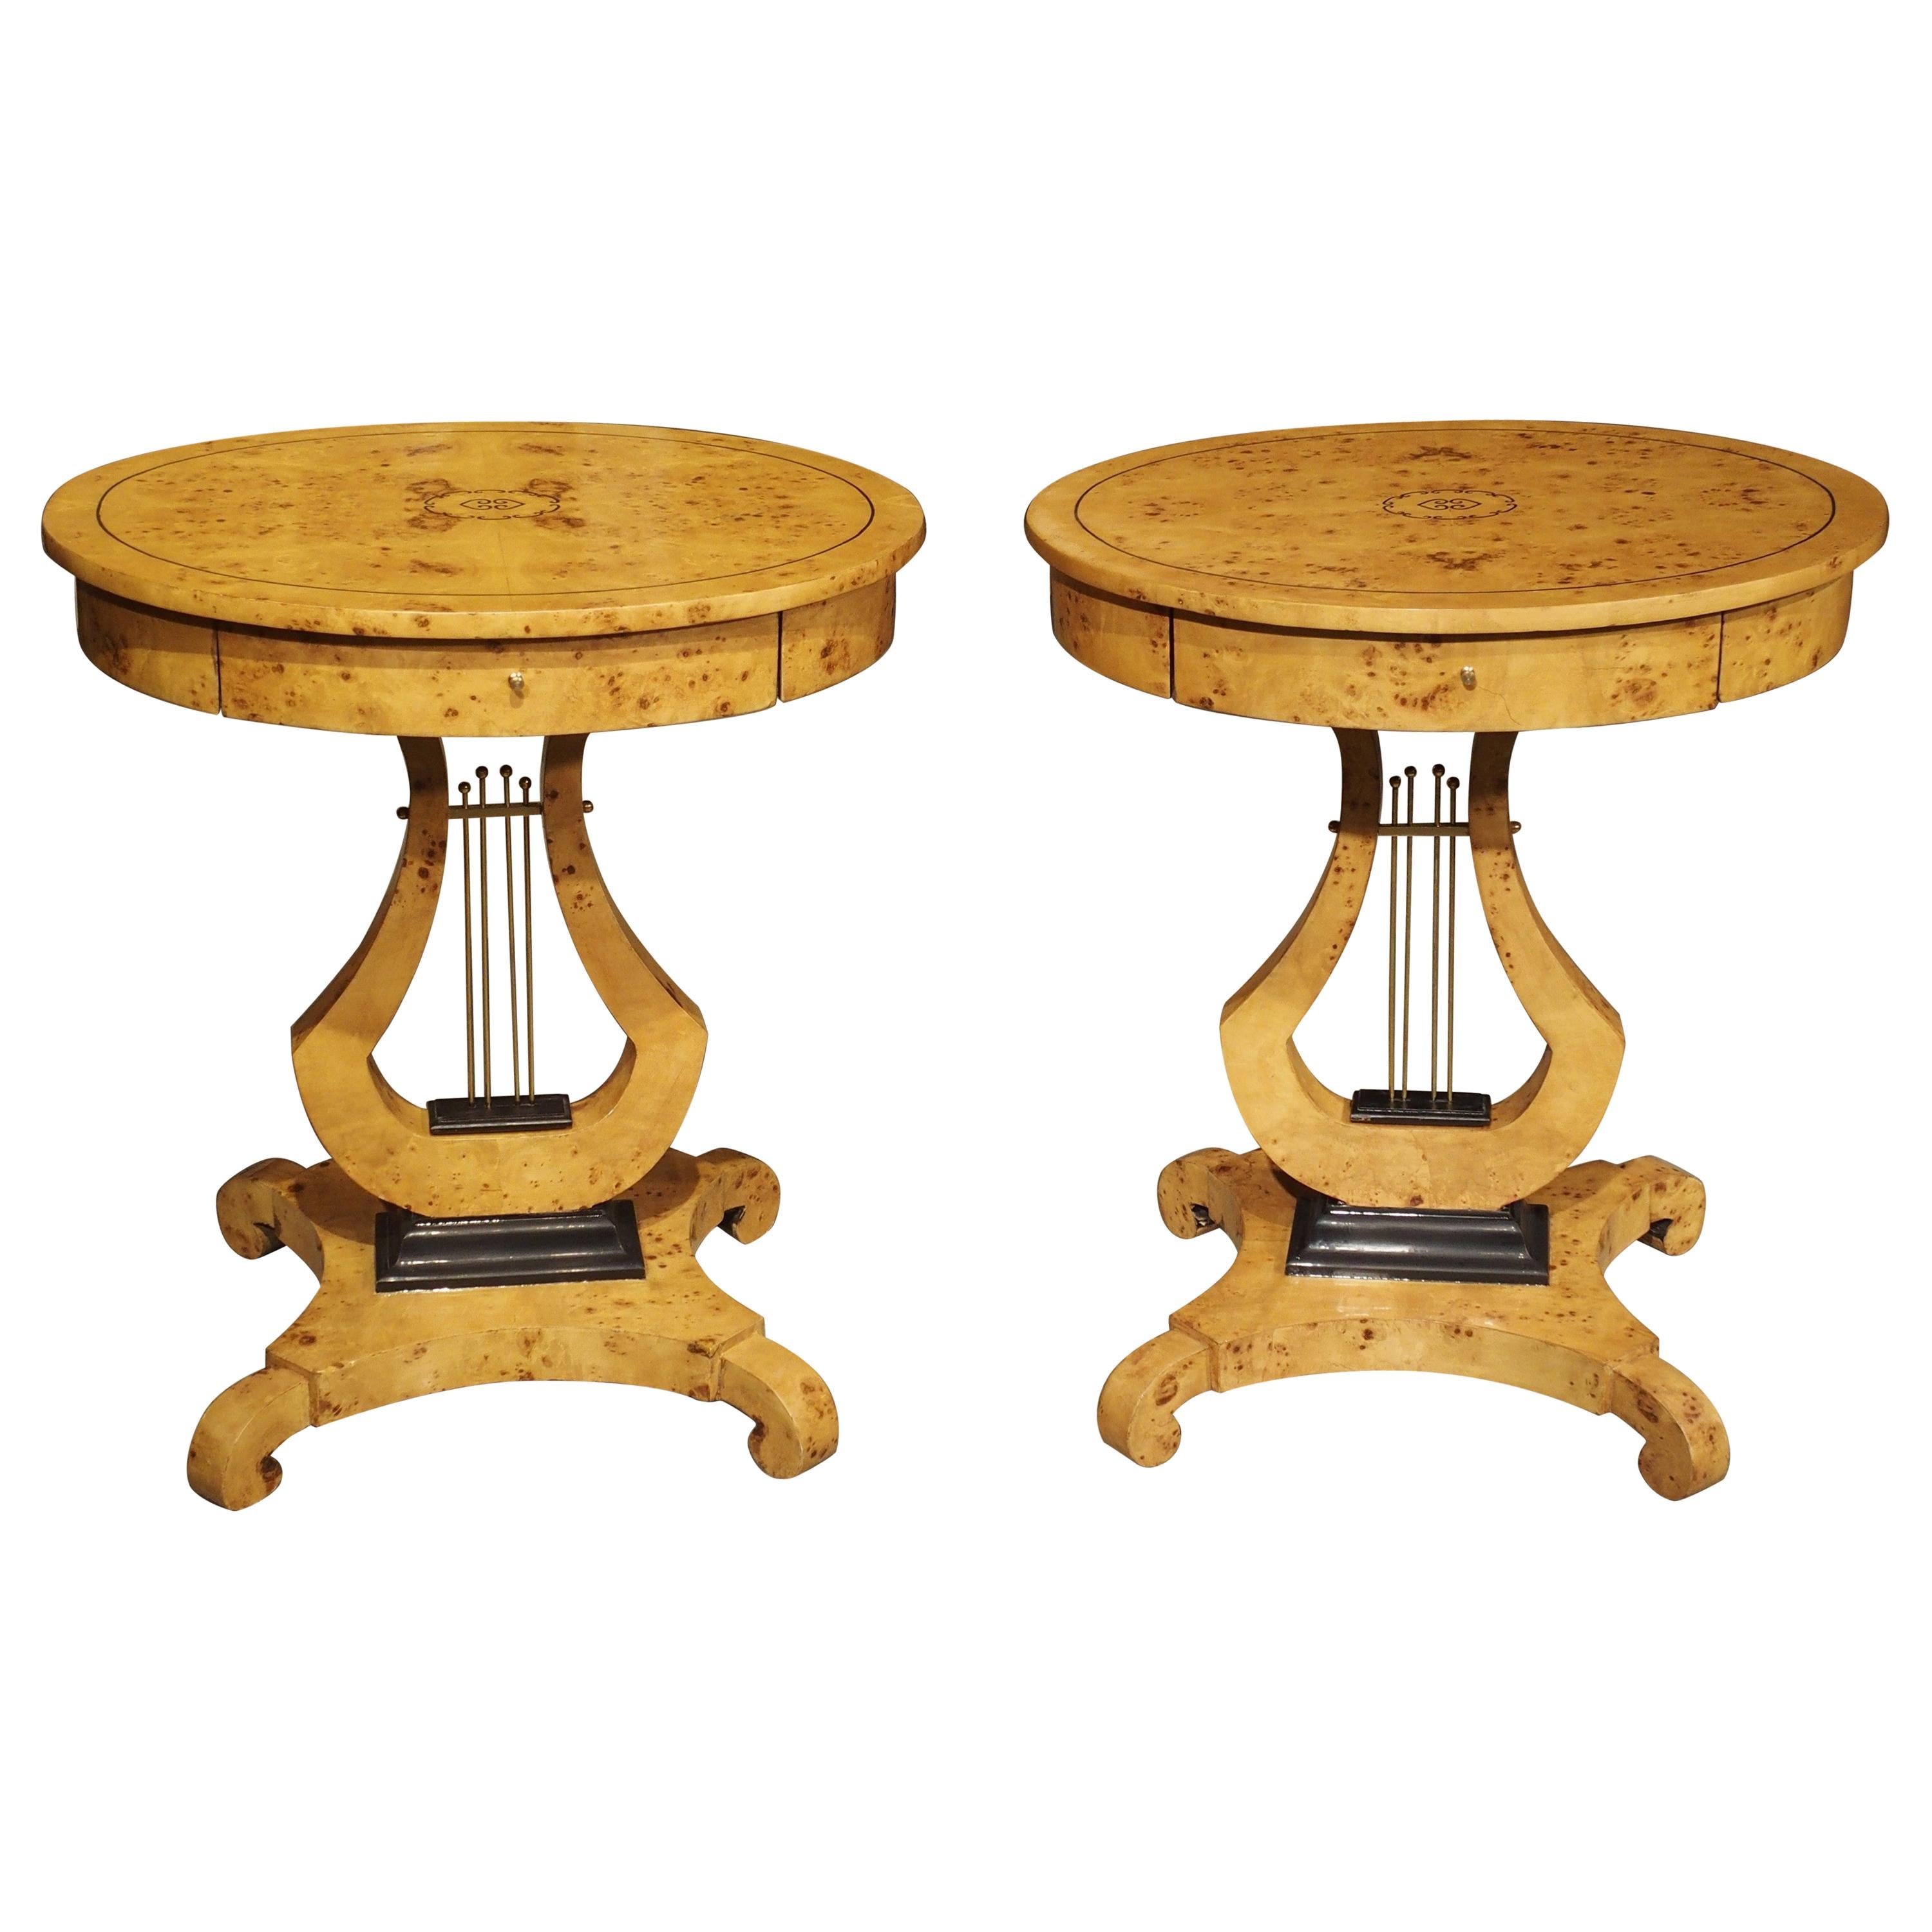 Pair of Elegant Oval French Burlwood Side Tables